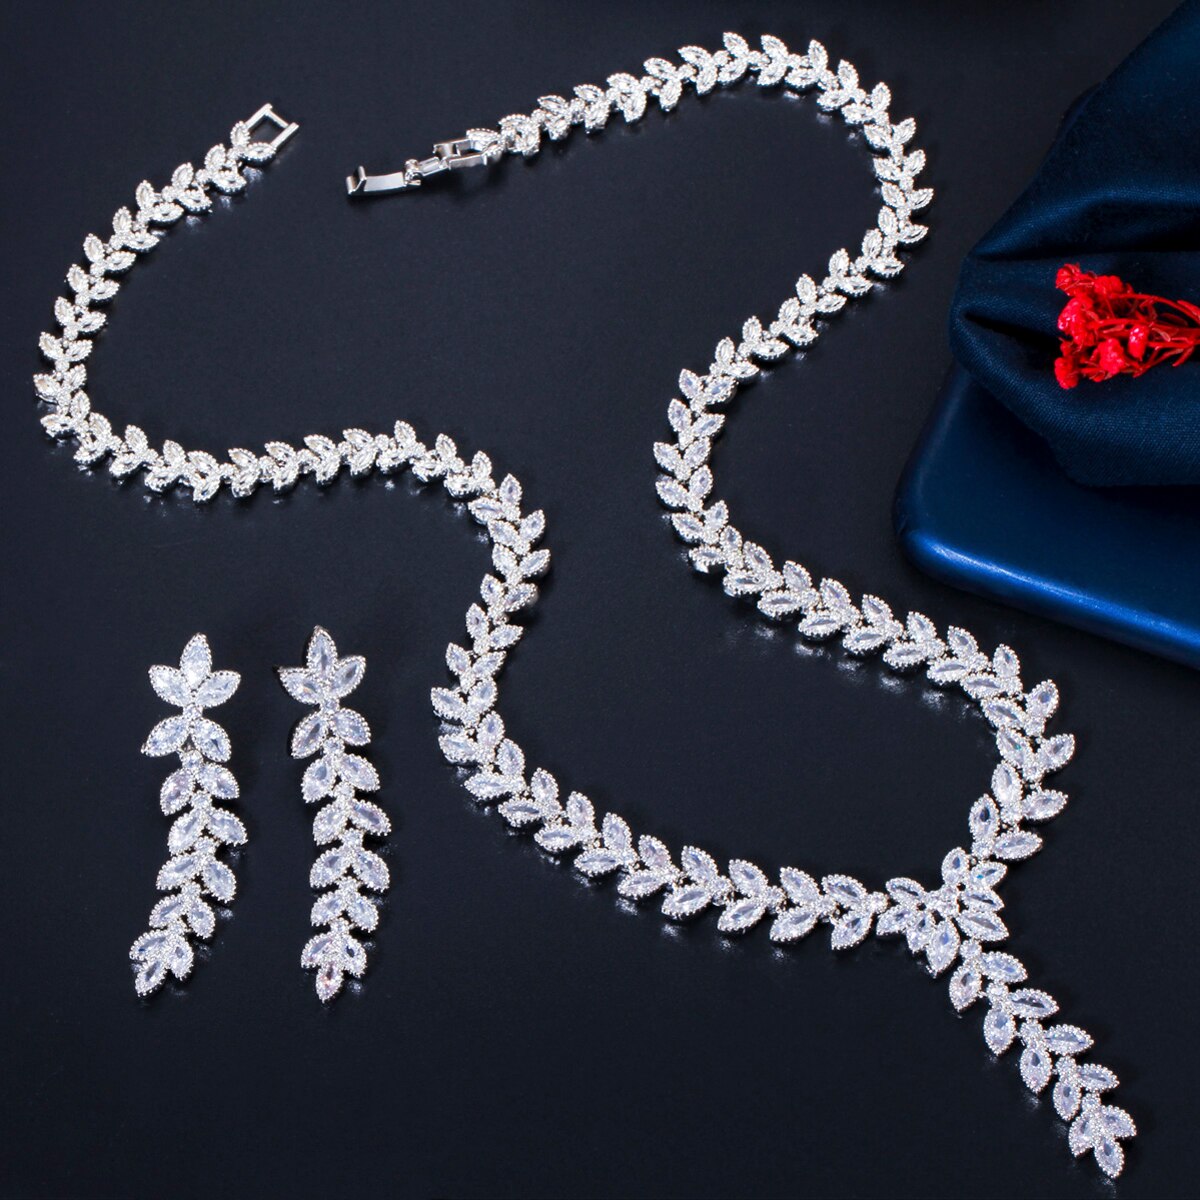 ThreeGraces-Elegant-Cubic-Zirconia-Silver-Color-Leaf-Shape-Earring-and-Necklace-Wedding-Jewelry-Sets-1005001632637038-8